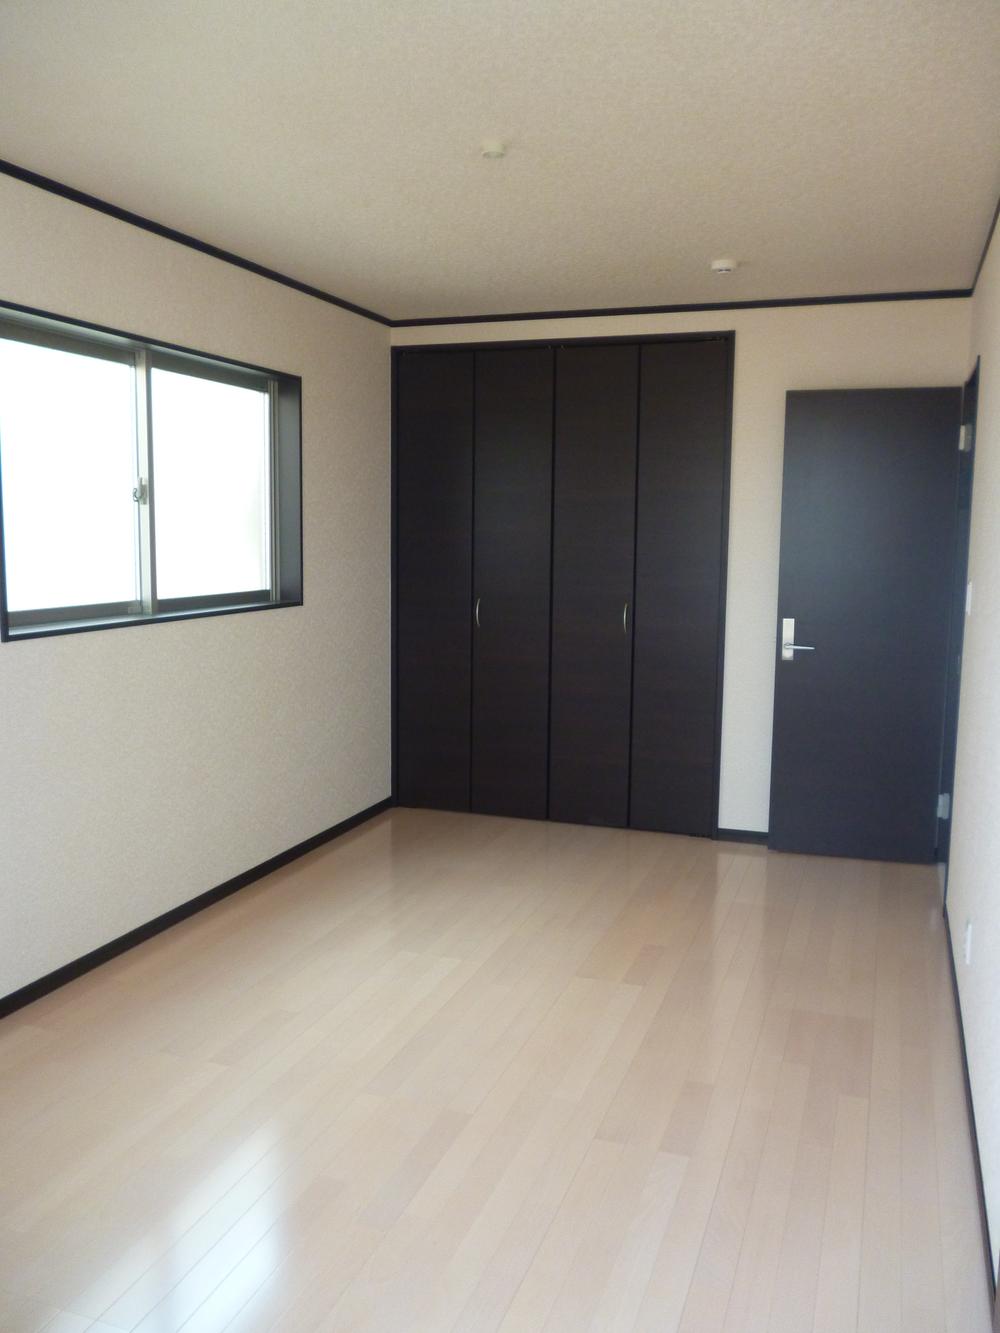 Same specifications photos (Other introspection). (1 ・ 2 Building) same specification